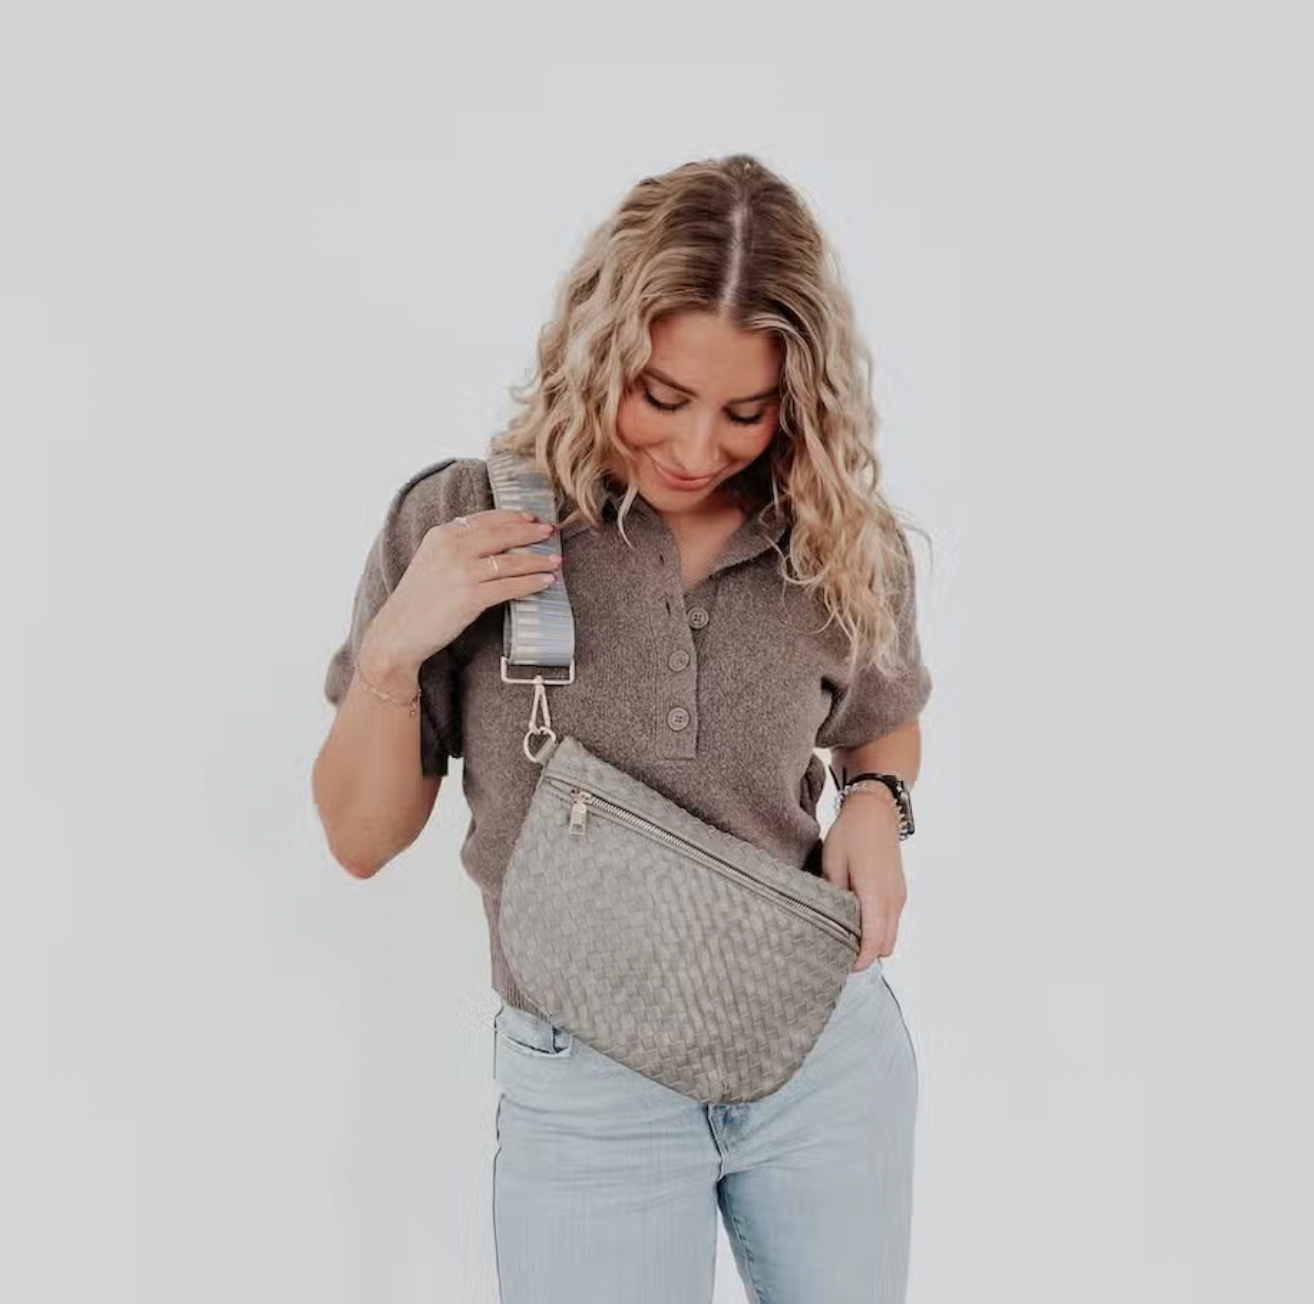 Woven Westlyn Bum Bag - Multiple Colors